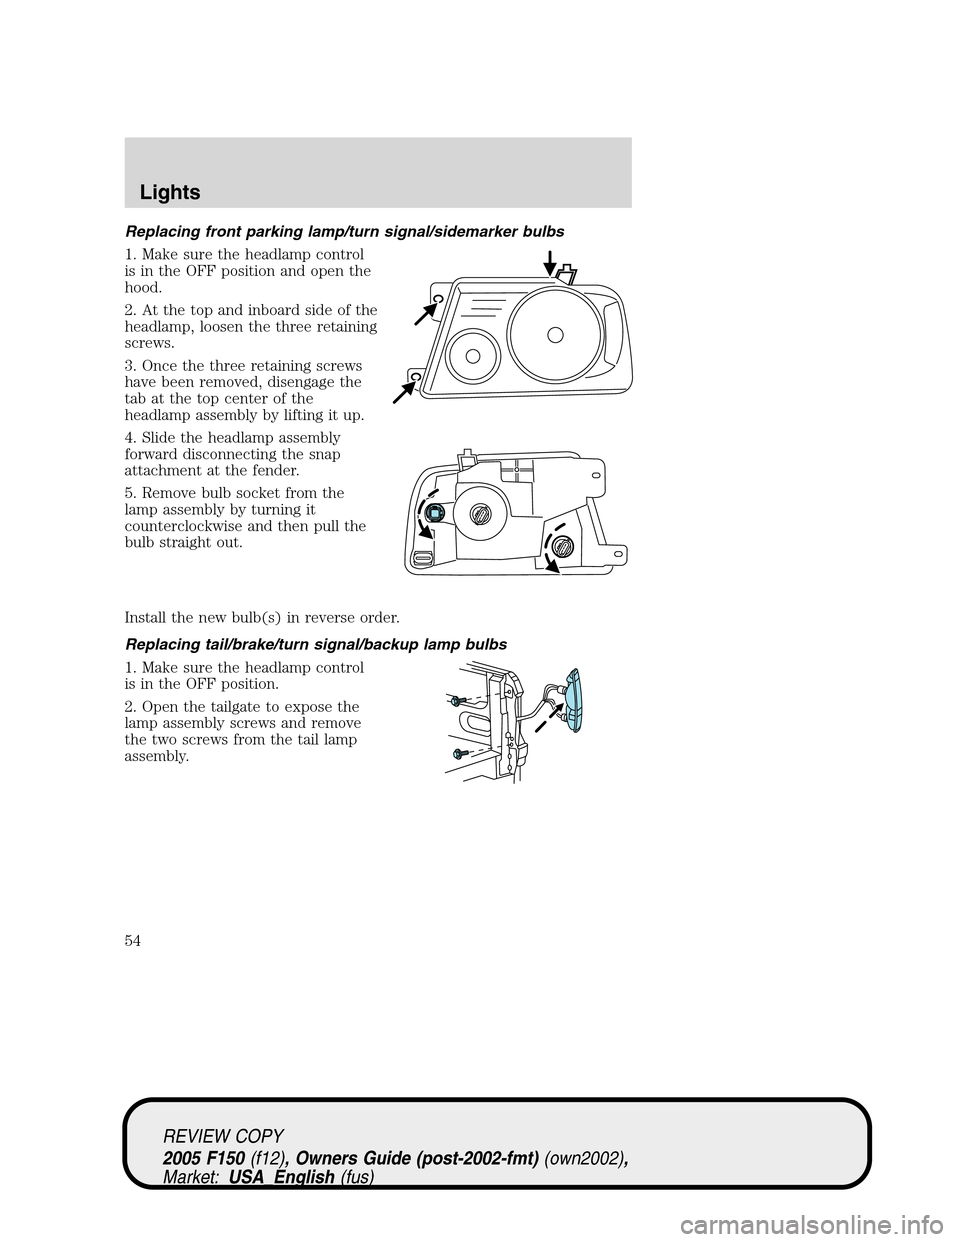 FORD F150 2005 11.G Owners Manual Replacing front parking lamp/turn signal/sidemarker bulbs
1. Make sure the headlamp control
is in the OFF position and open the
hood.
2. At the top and inboard side of the
headlamp, loosen the three r